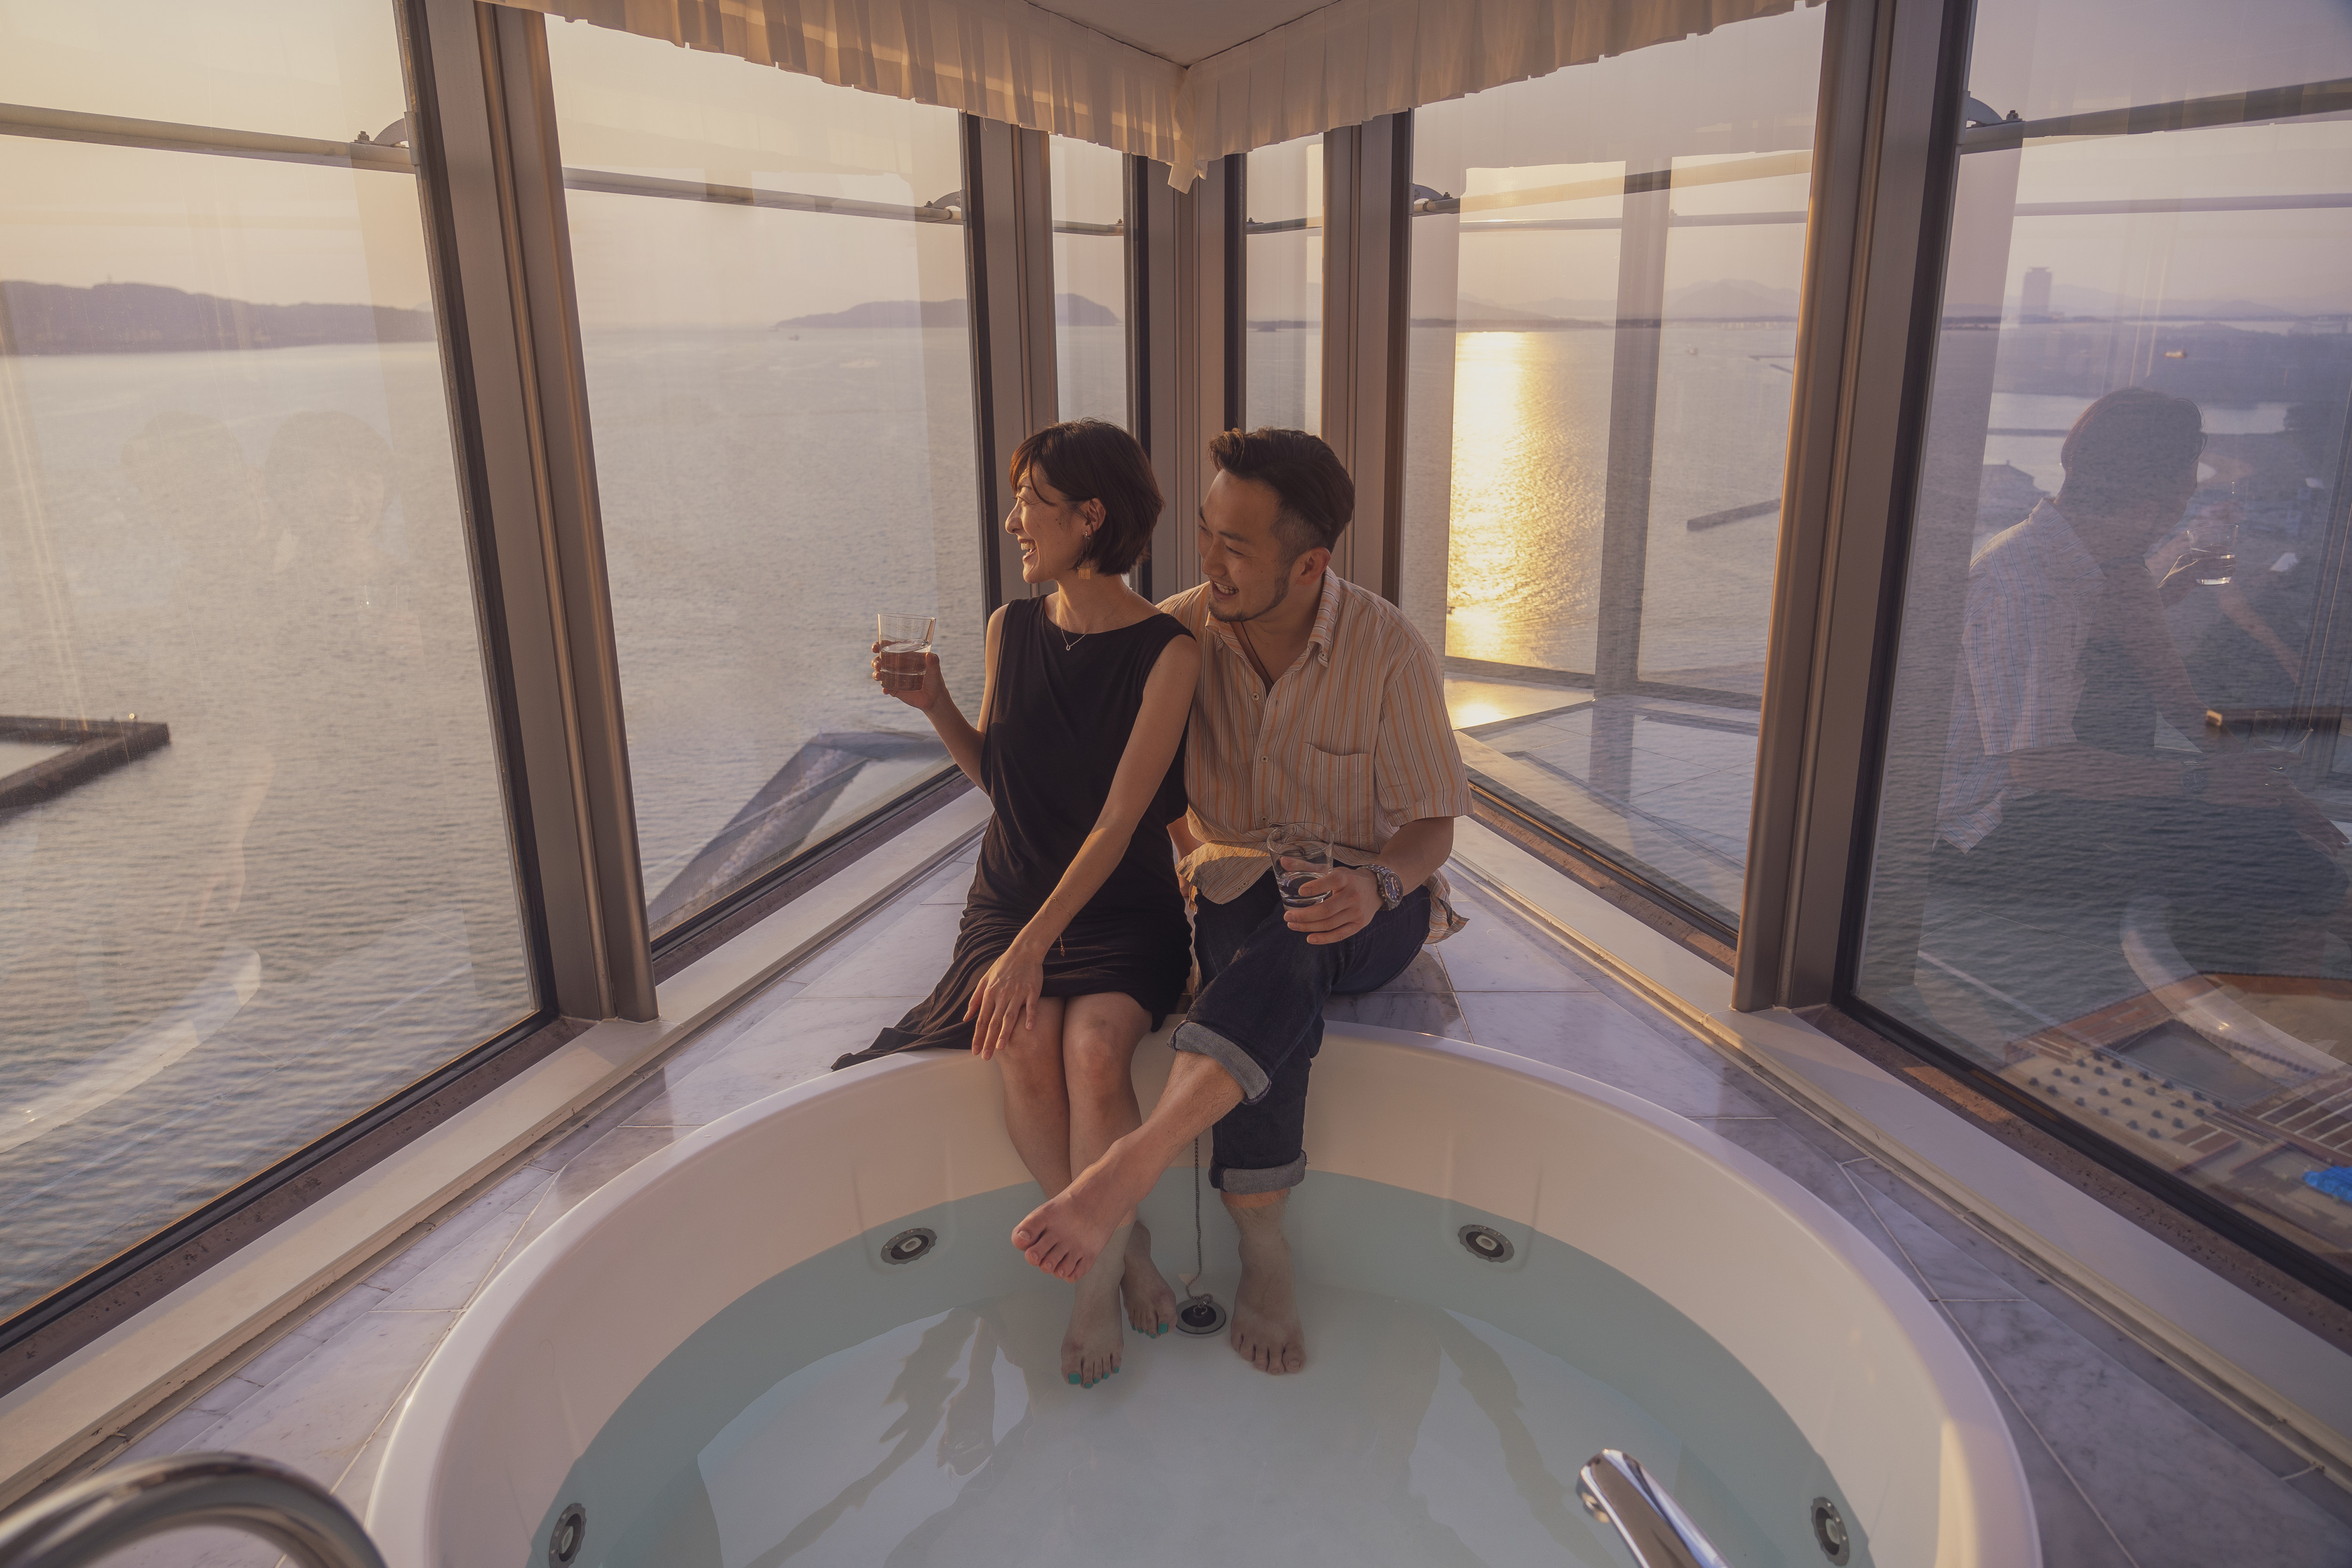 Couple in a Jetted Tub Enjoying the View from a Guest Room with Large Windows